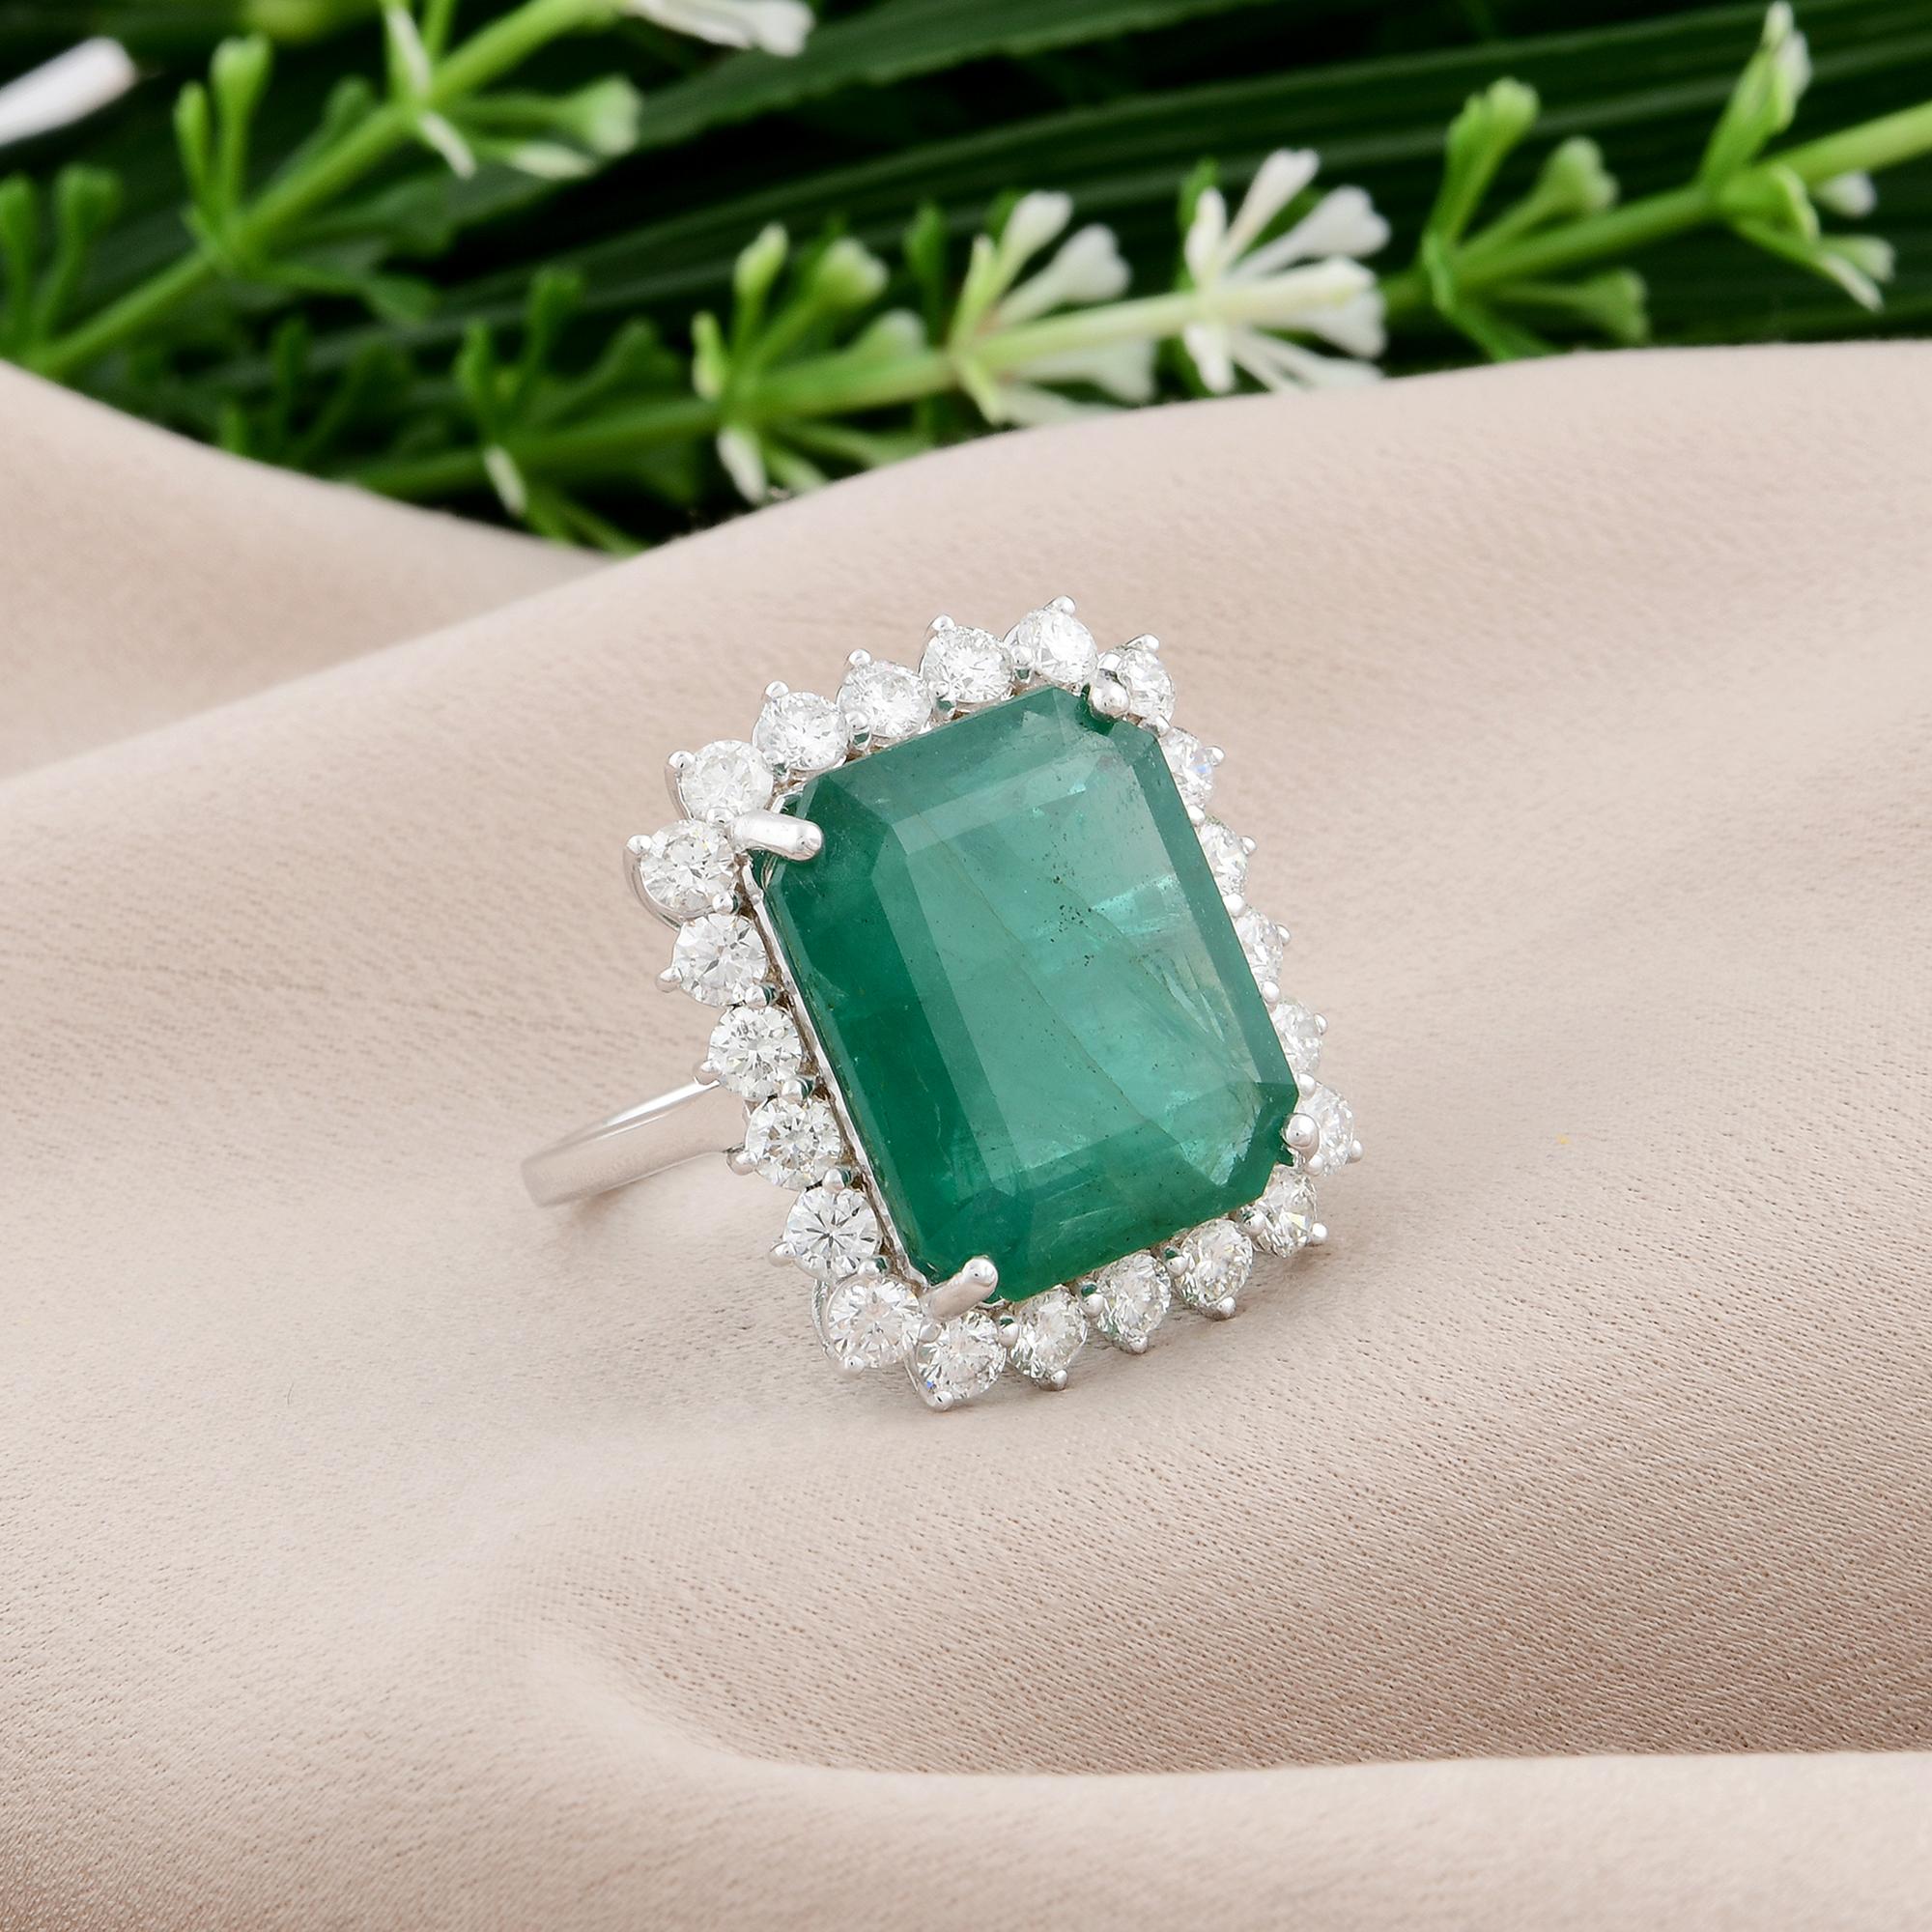 For Sale:  13.87 Total Carat Natural Emerald Gemstone Cocktail Ring Diamond 18k White Gold 3